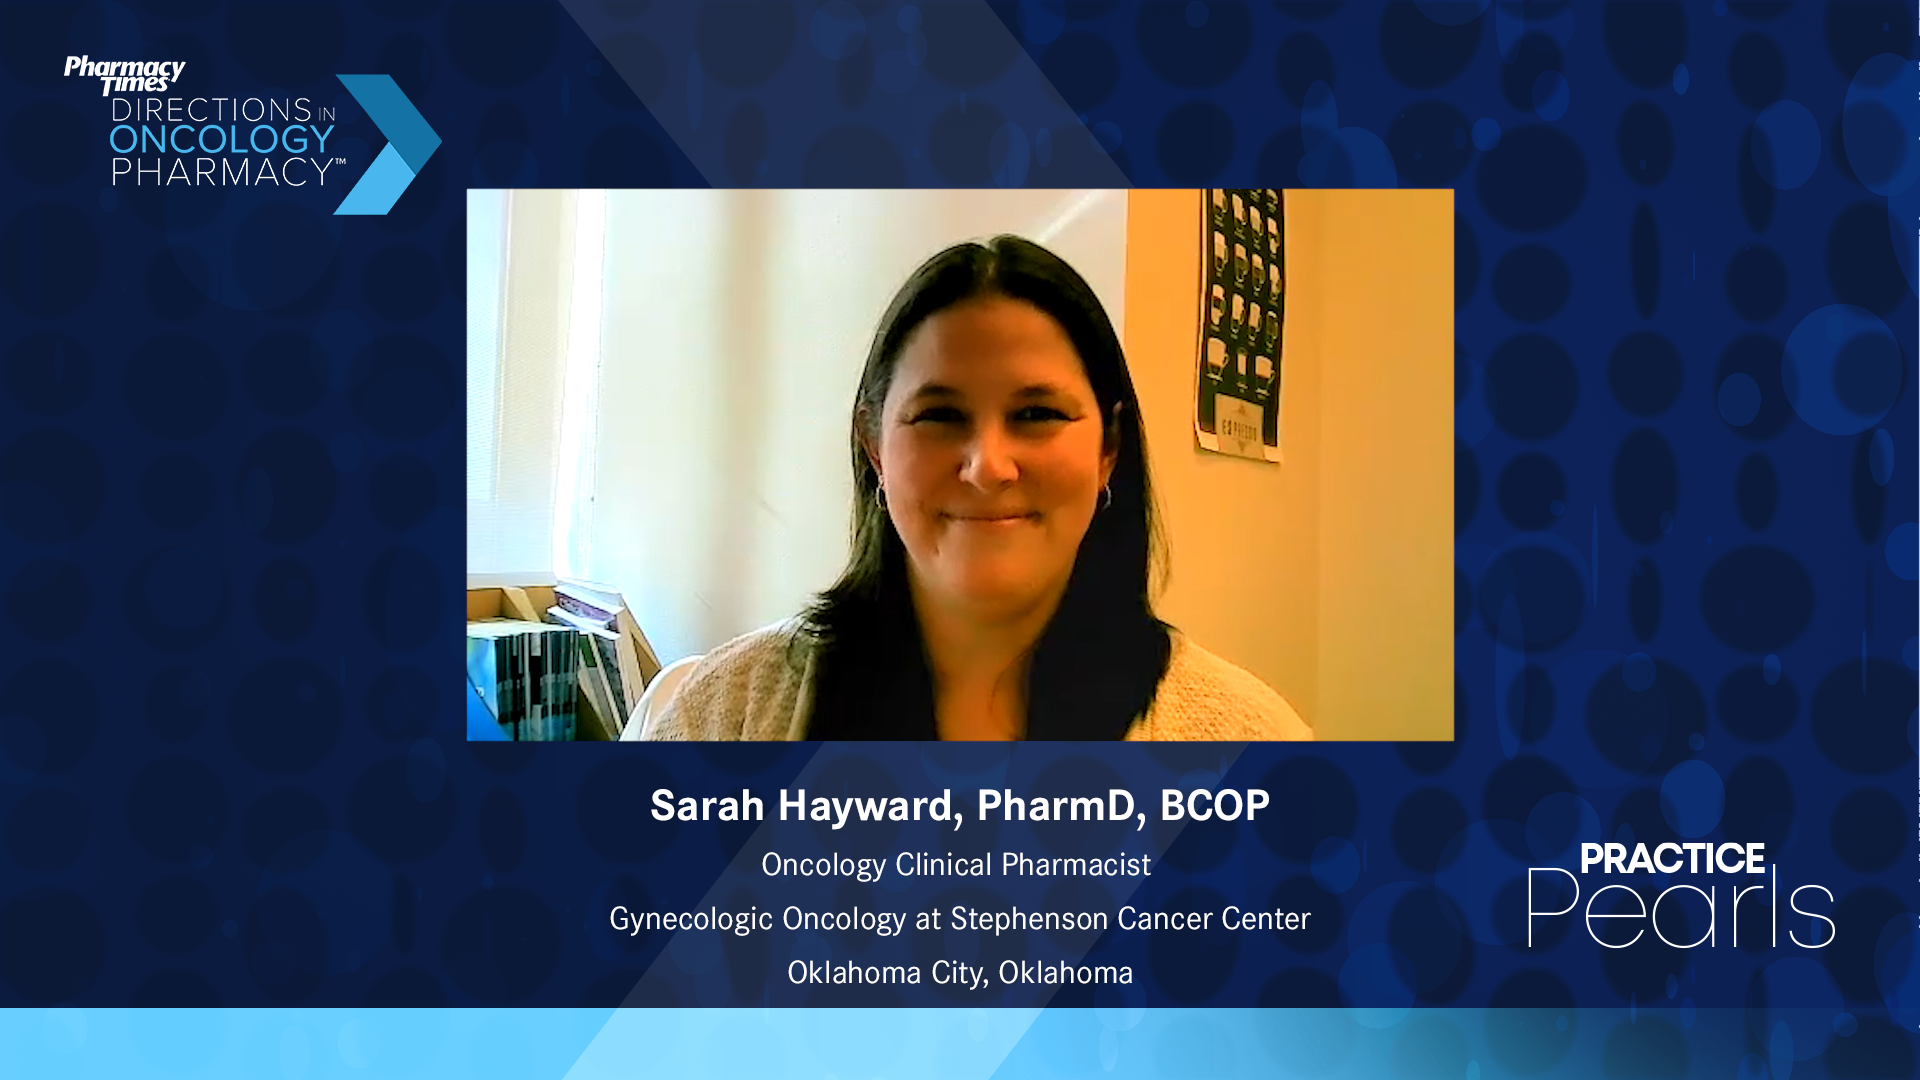 Practice Pearl 3: Provider Education of Emerging PARPi Data for Ovarian Cancer